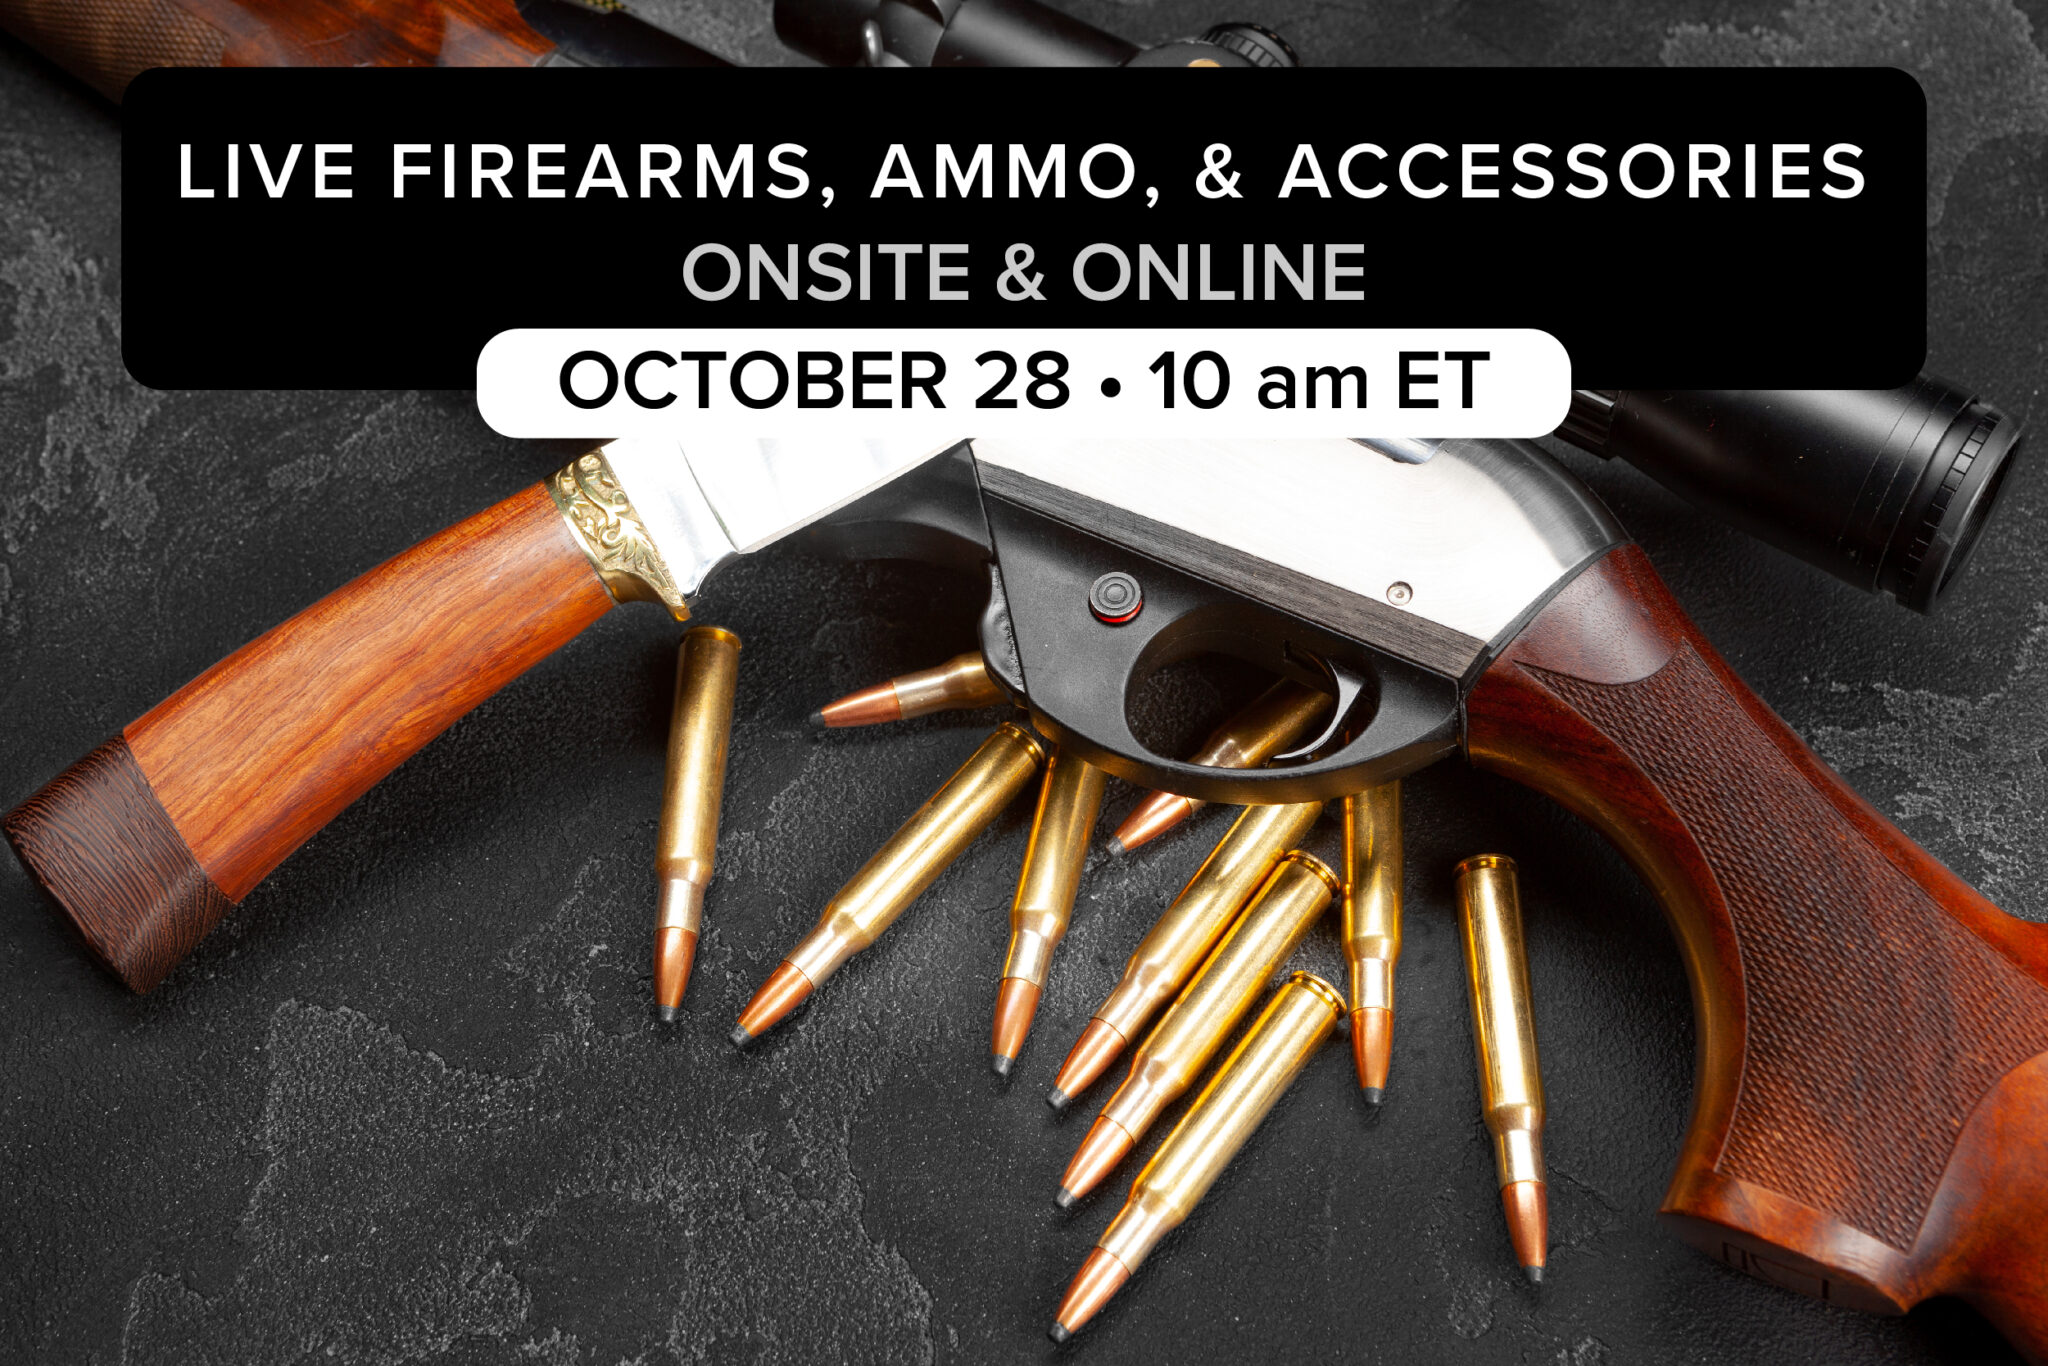 LIVE Firearms, Ammo, Accessories | Oct. 28